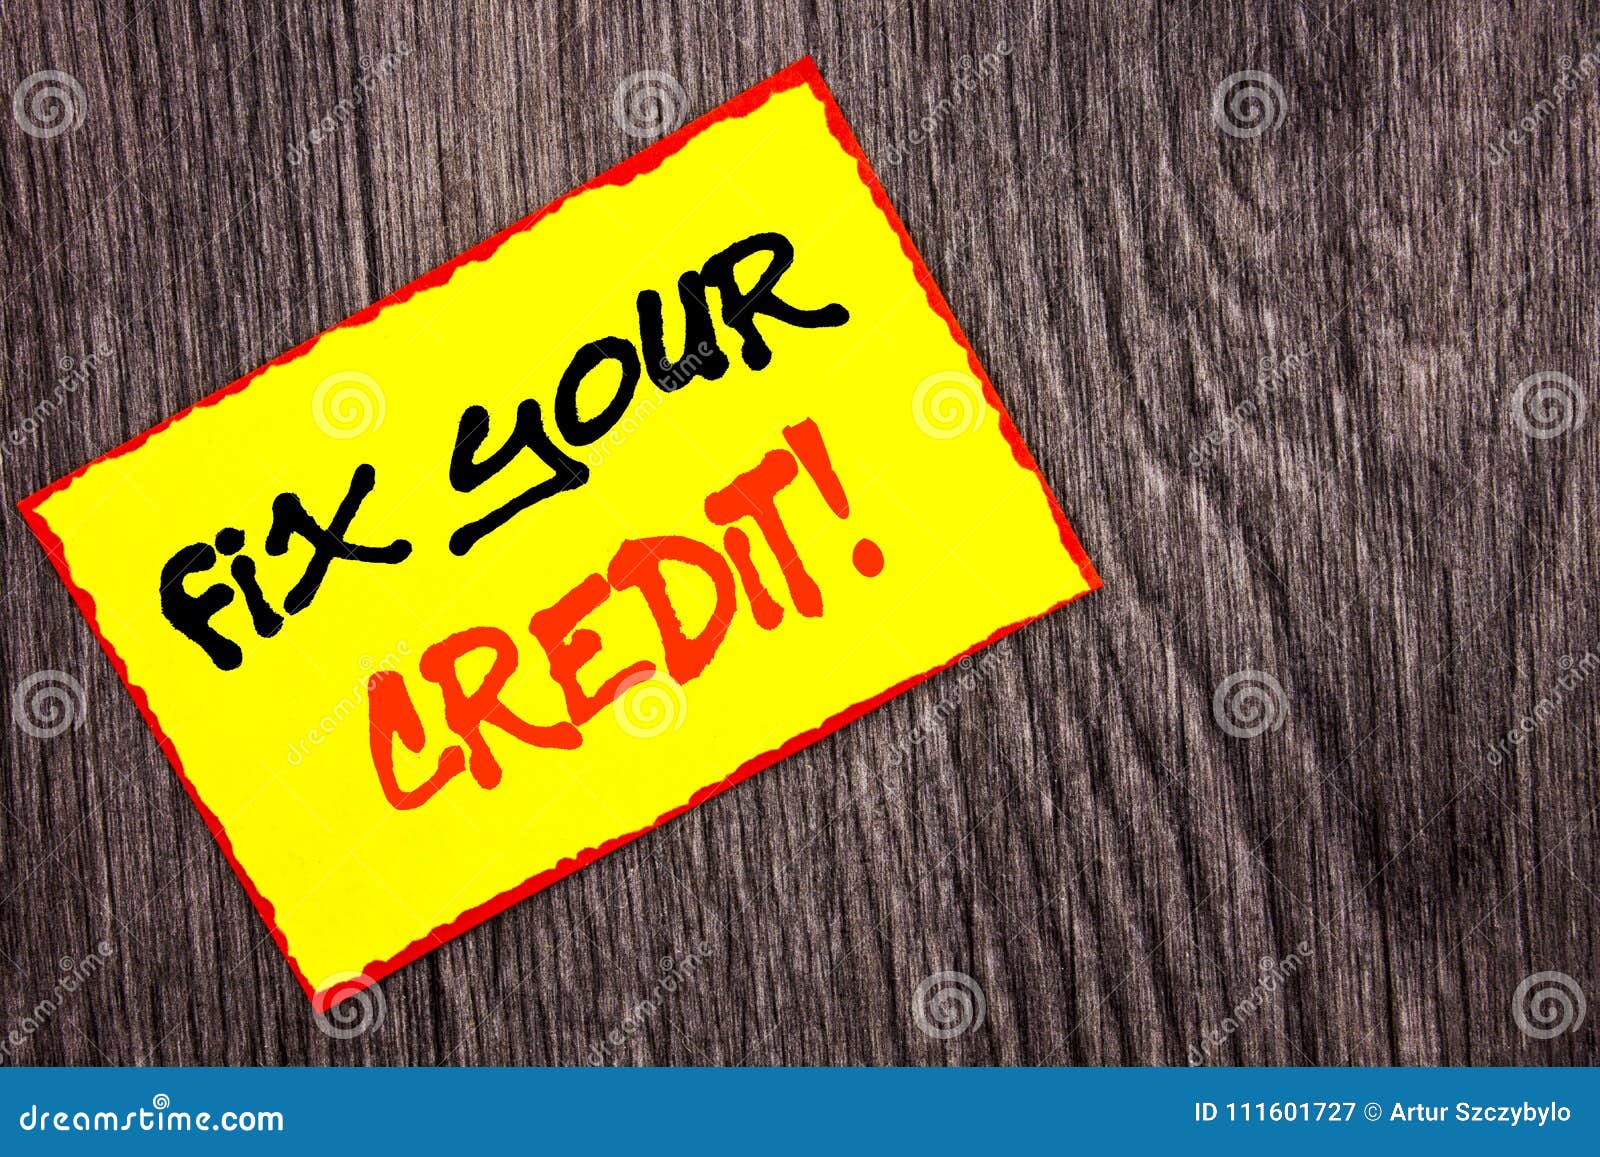 conceptual hand writing text showing fix your credit. concept meaning bad score rating avice fix improvement repair written on yel